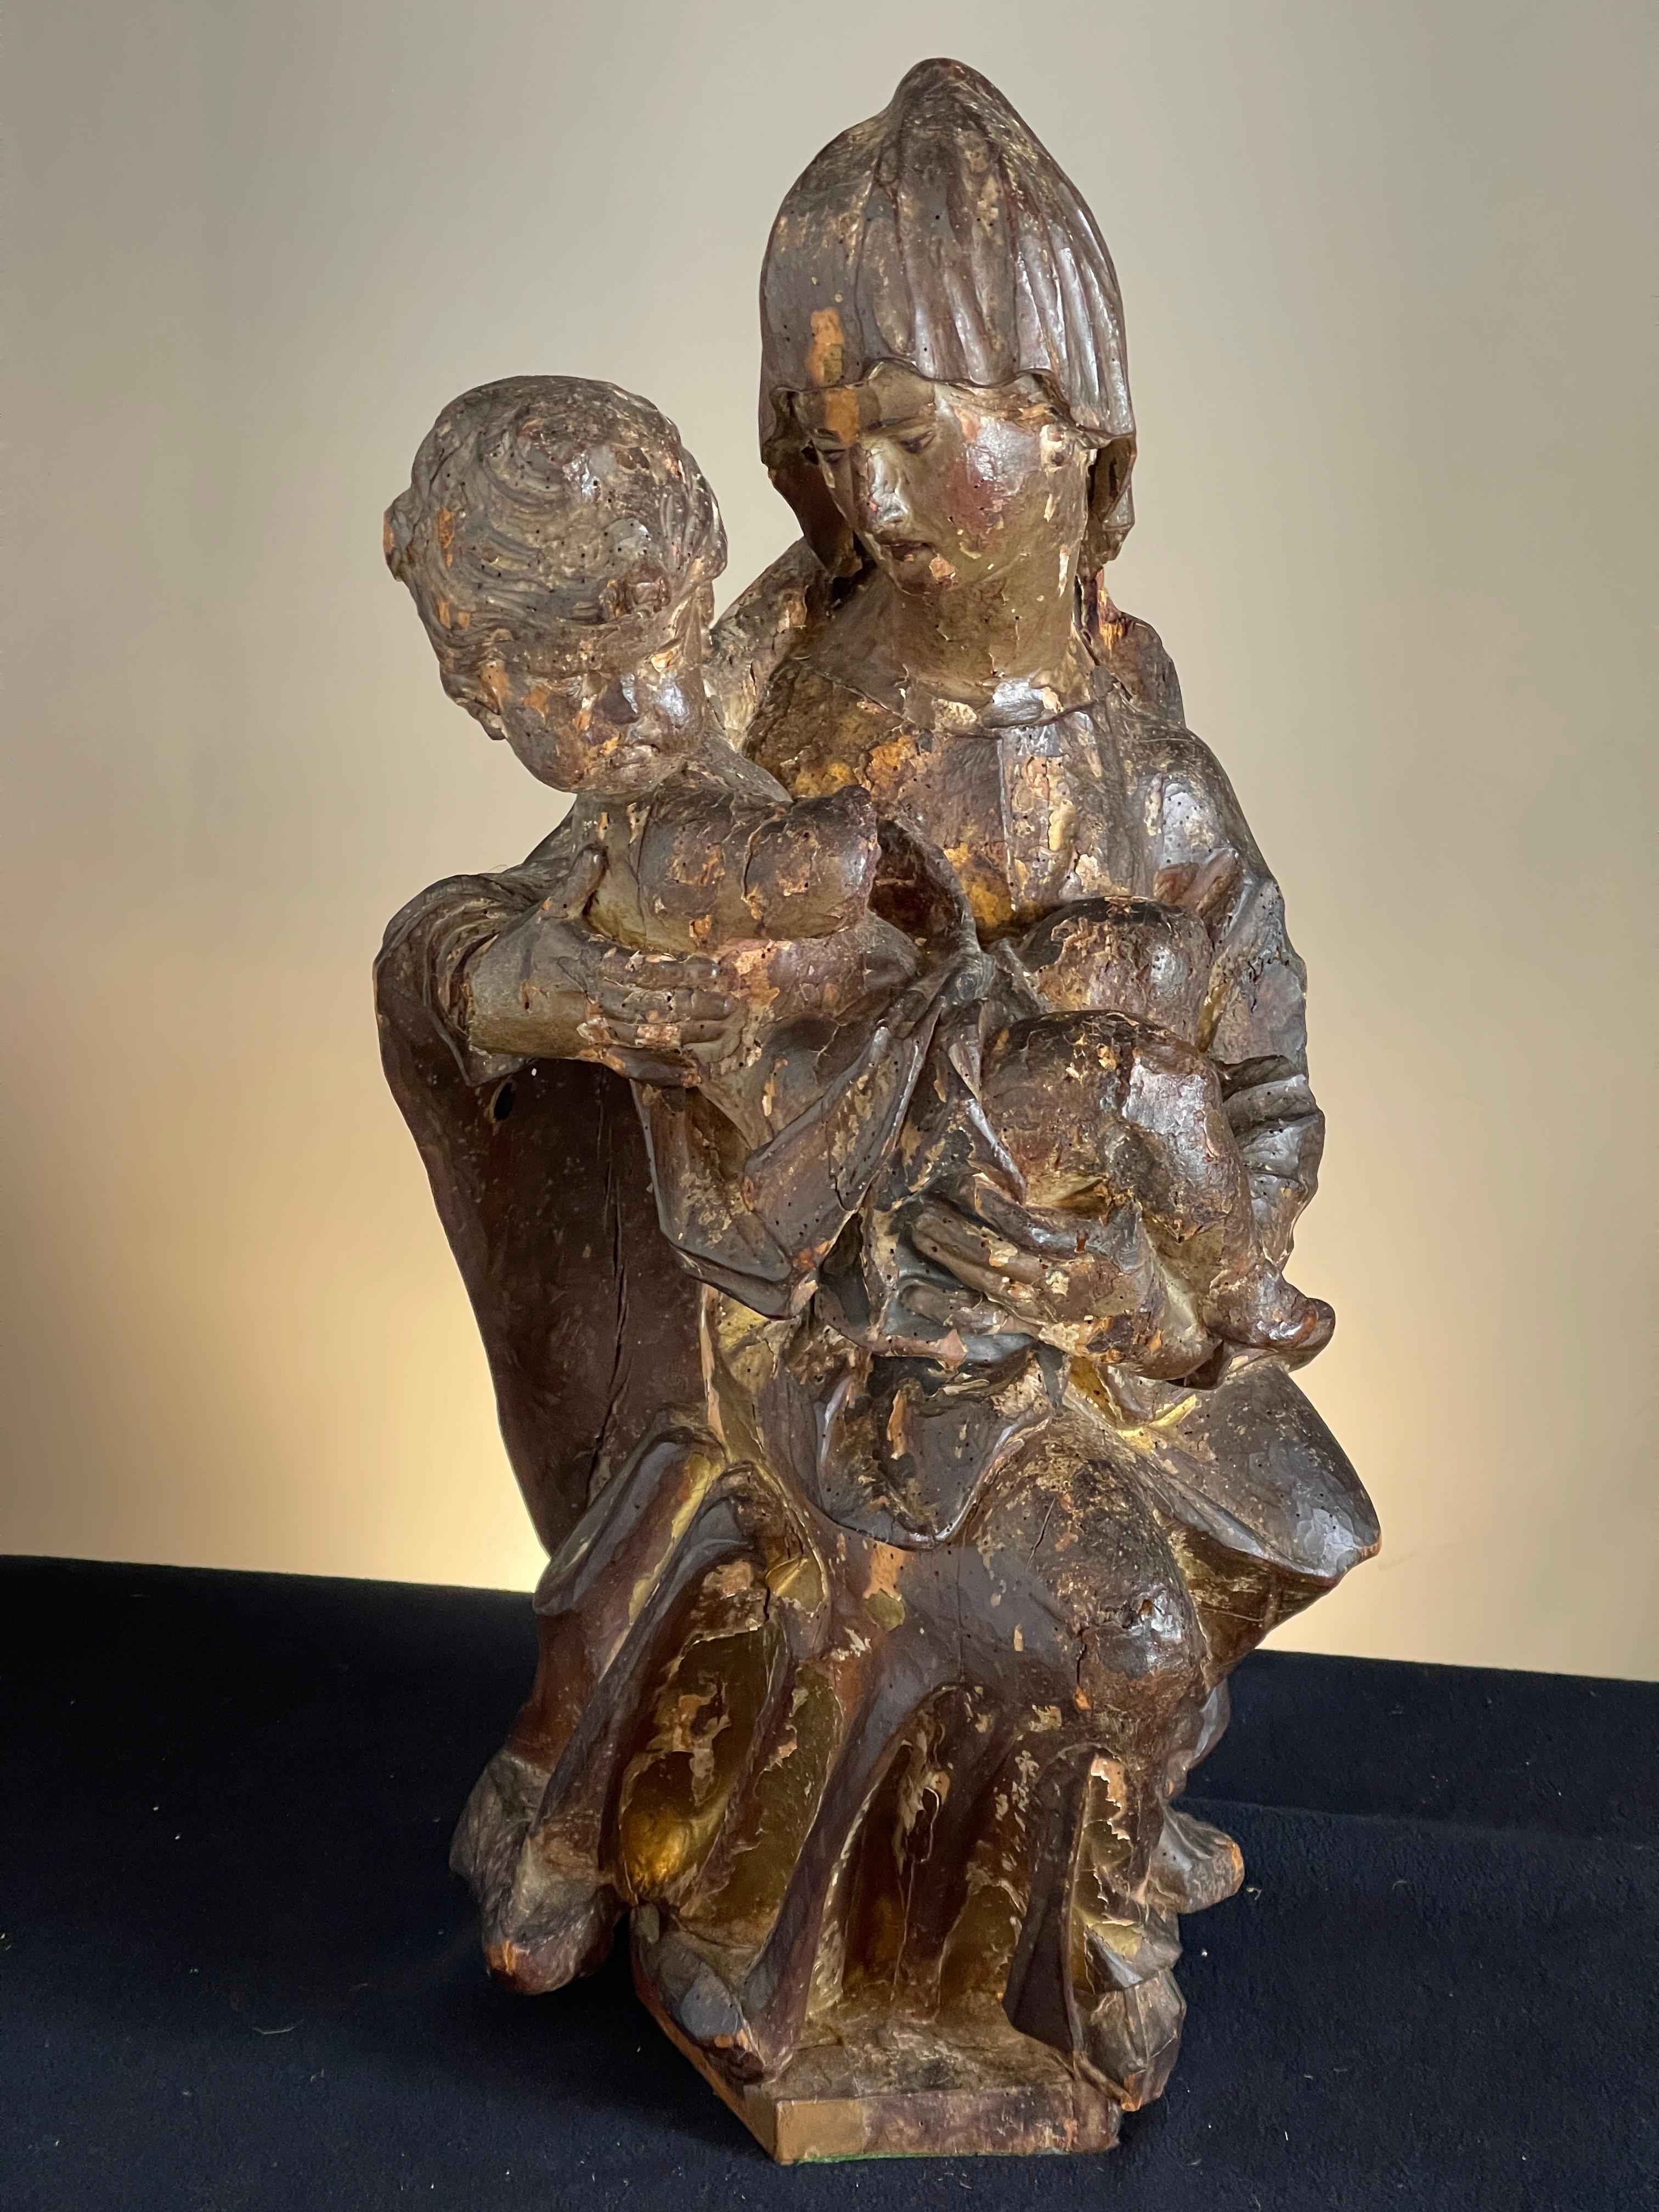 16th Century Madonna and child wood carving, retaining some original polychrome decoration

sizes 67 cms high, 30cms wide and 25 cms deep